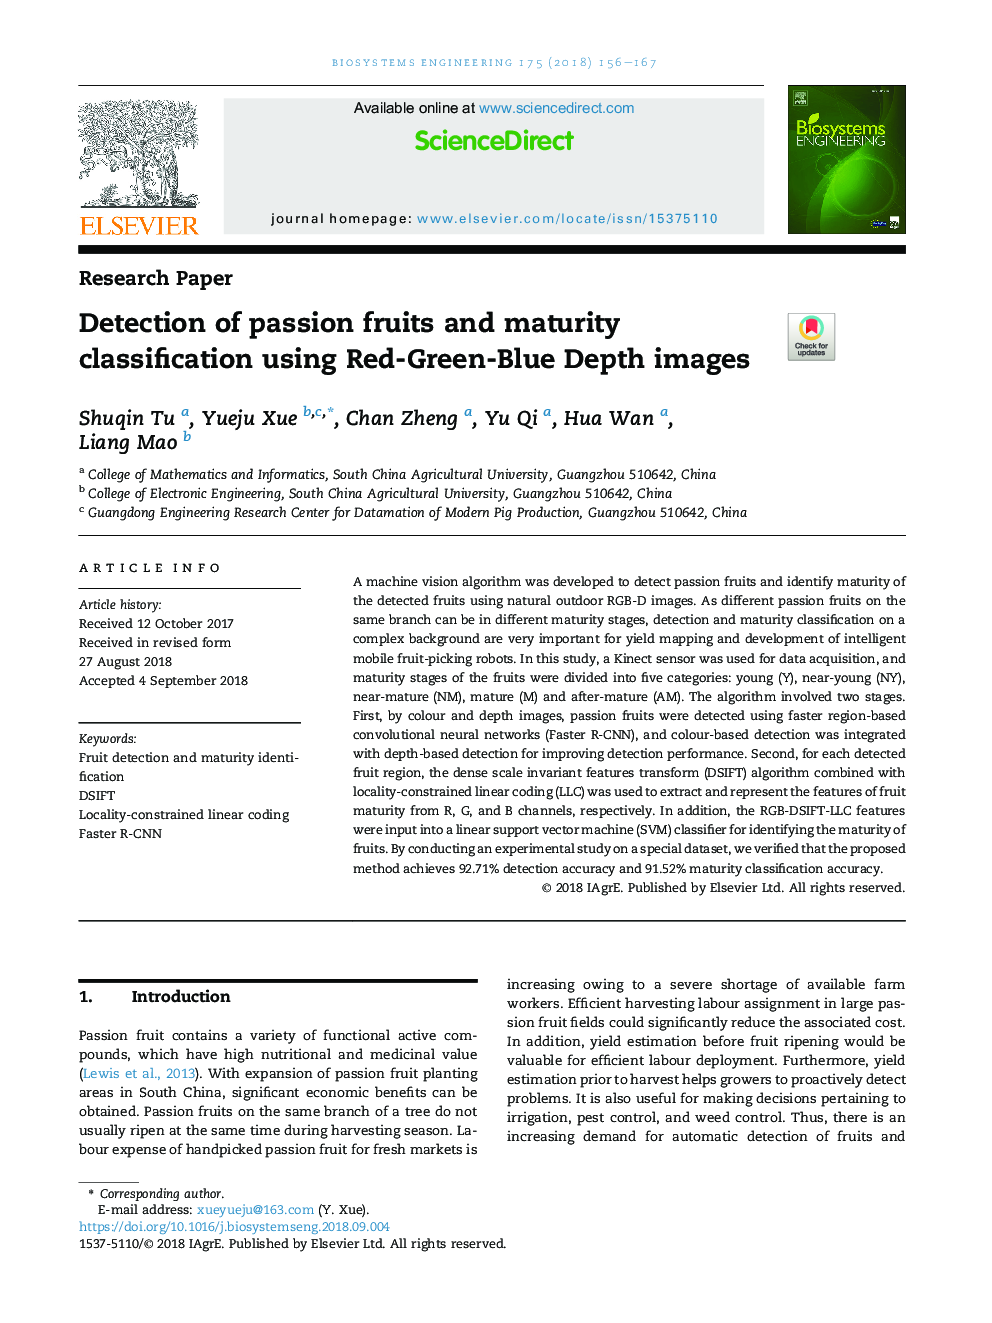 Detection of passion fruits and maturity classification using Red-Green-Blue Depth images